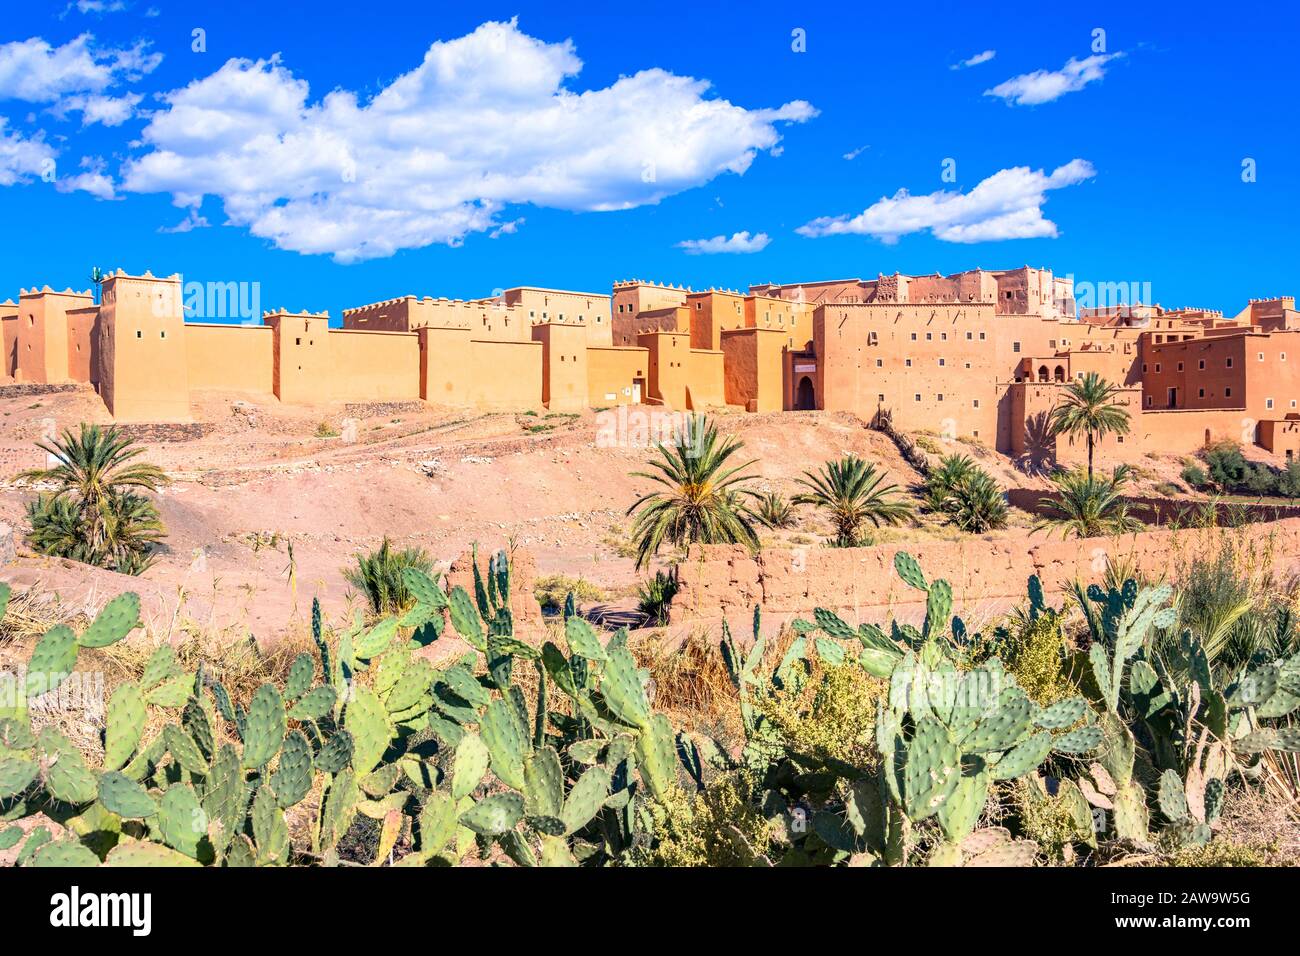 Taourirt Kasbah - Traditional Moroccan clay fortress in the city of Ouarzazate, Morocco. Stock Photo